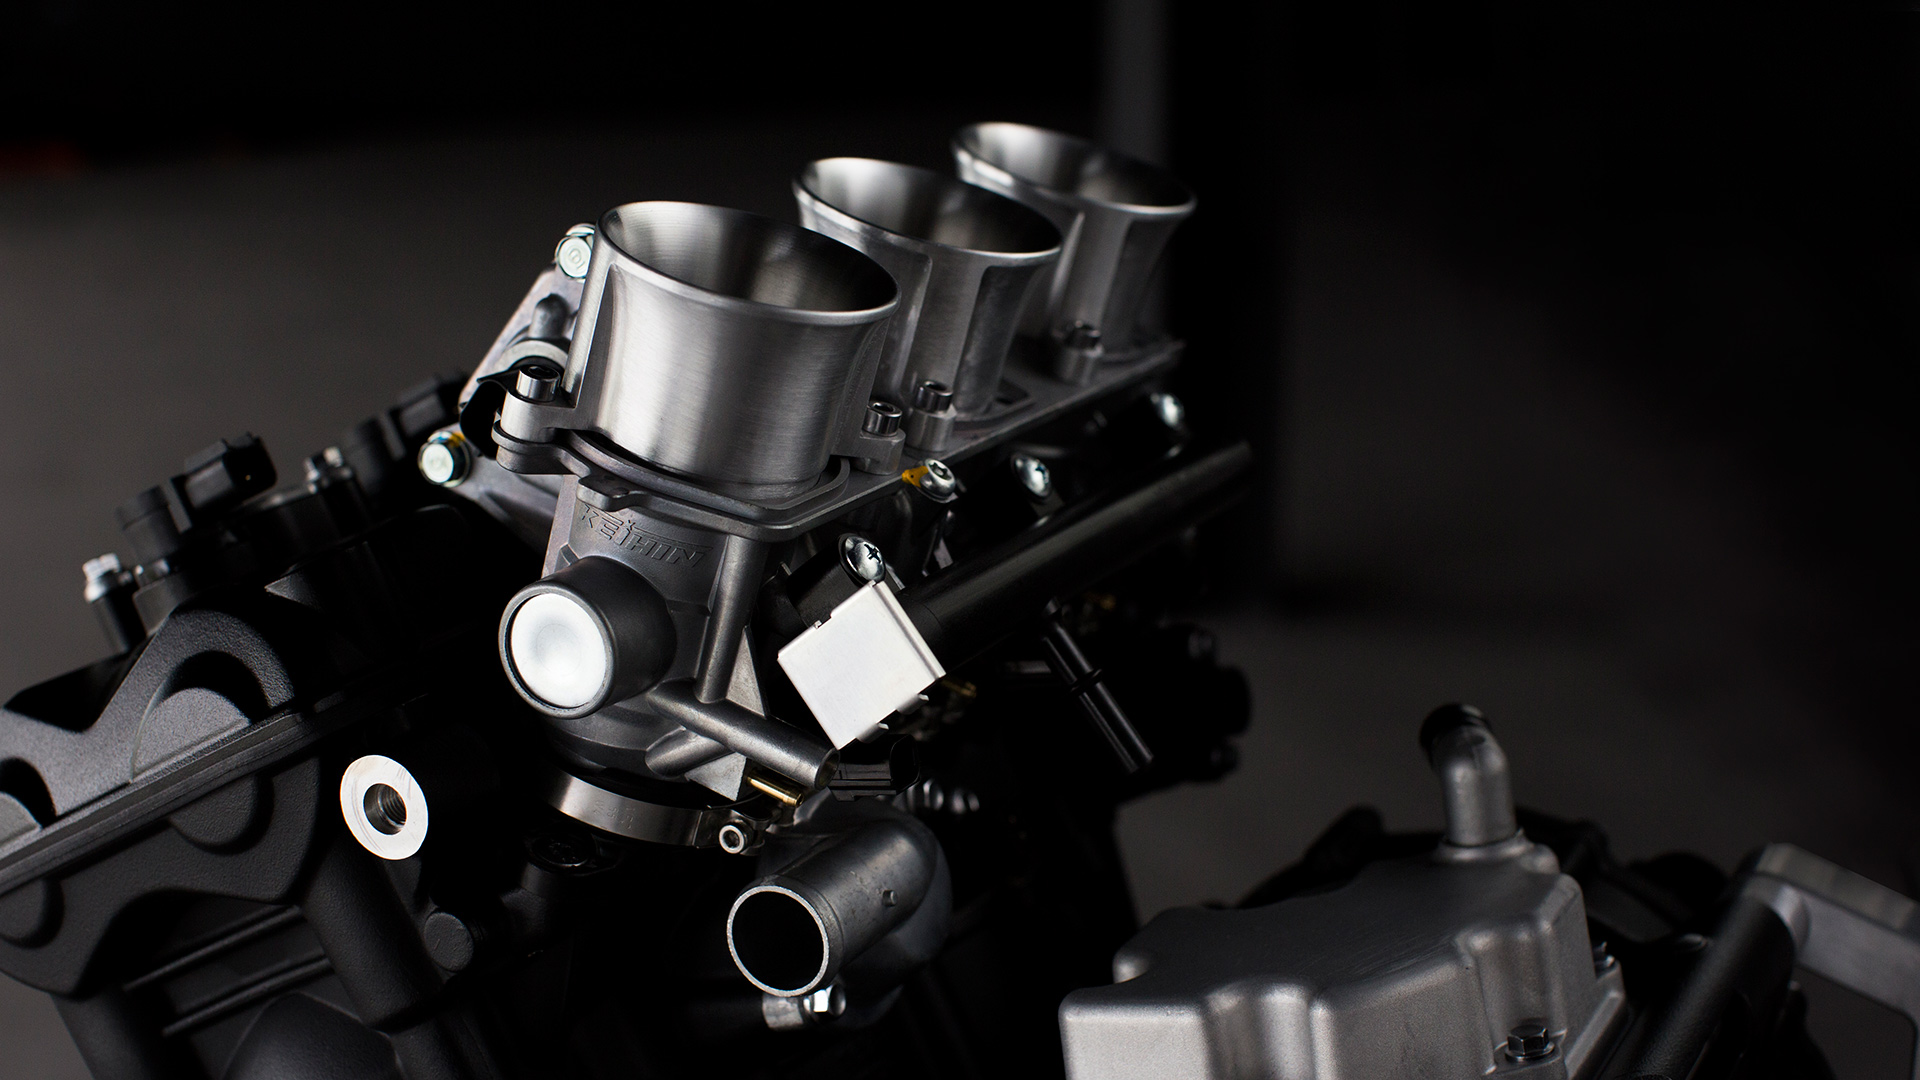 Close up of Triumph Moto2 motorcycle engine